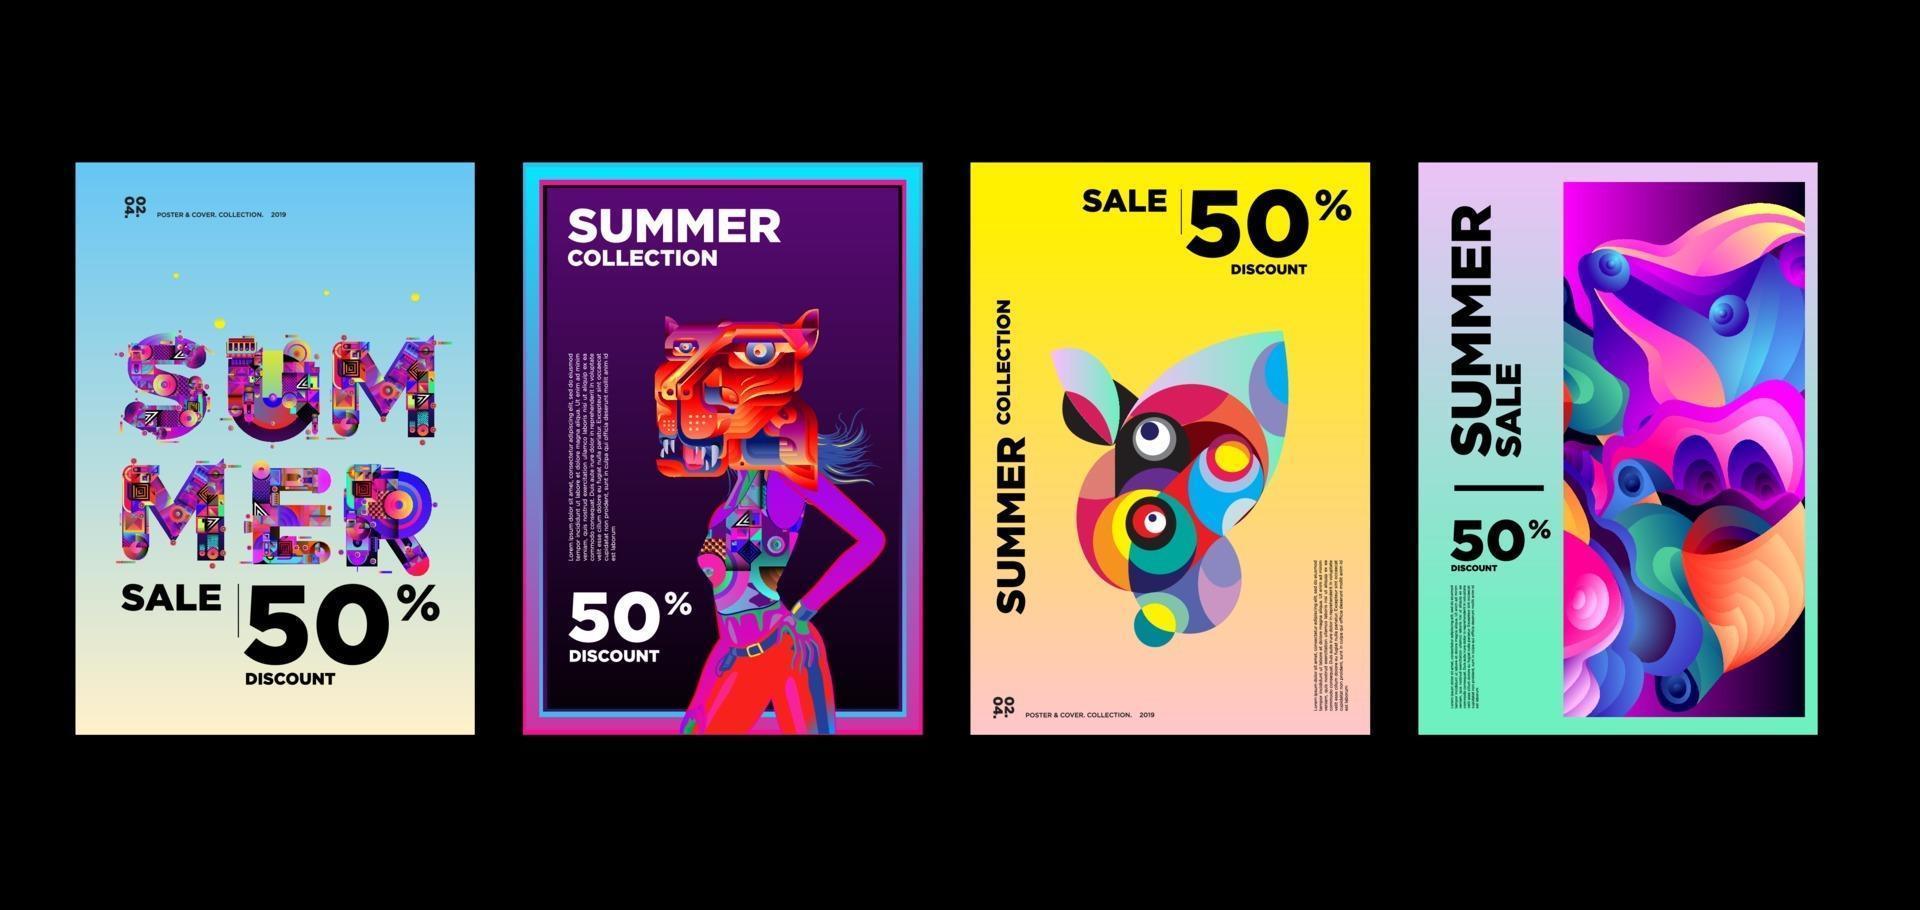 Summer music and fashion sale discount promotion banner template vector